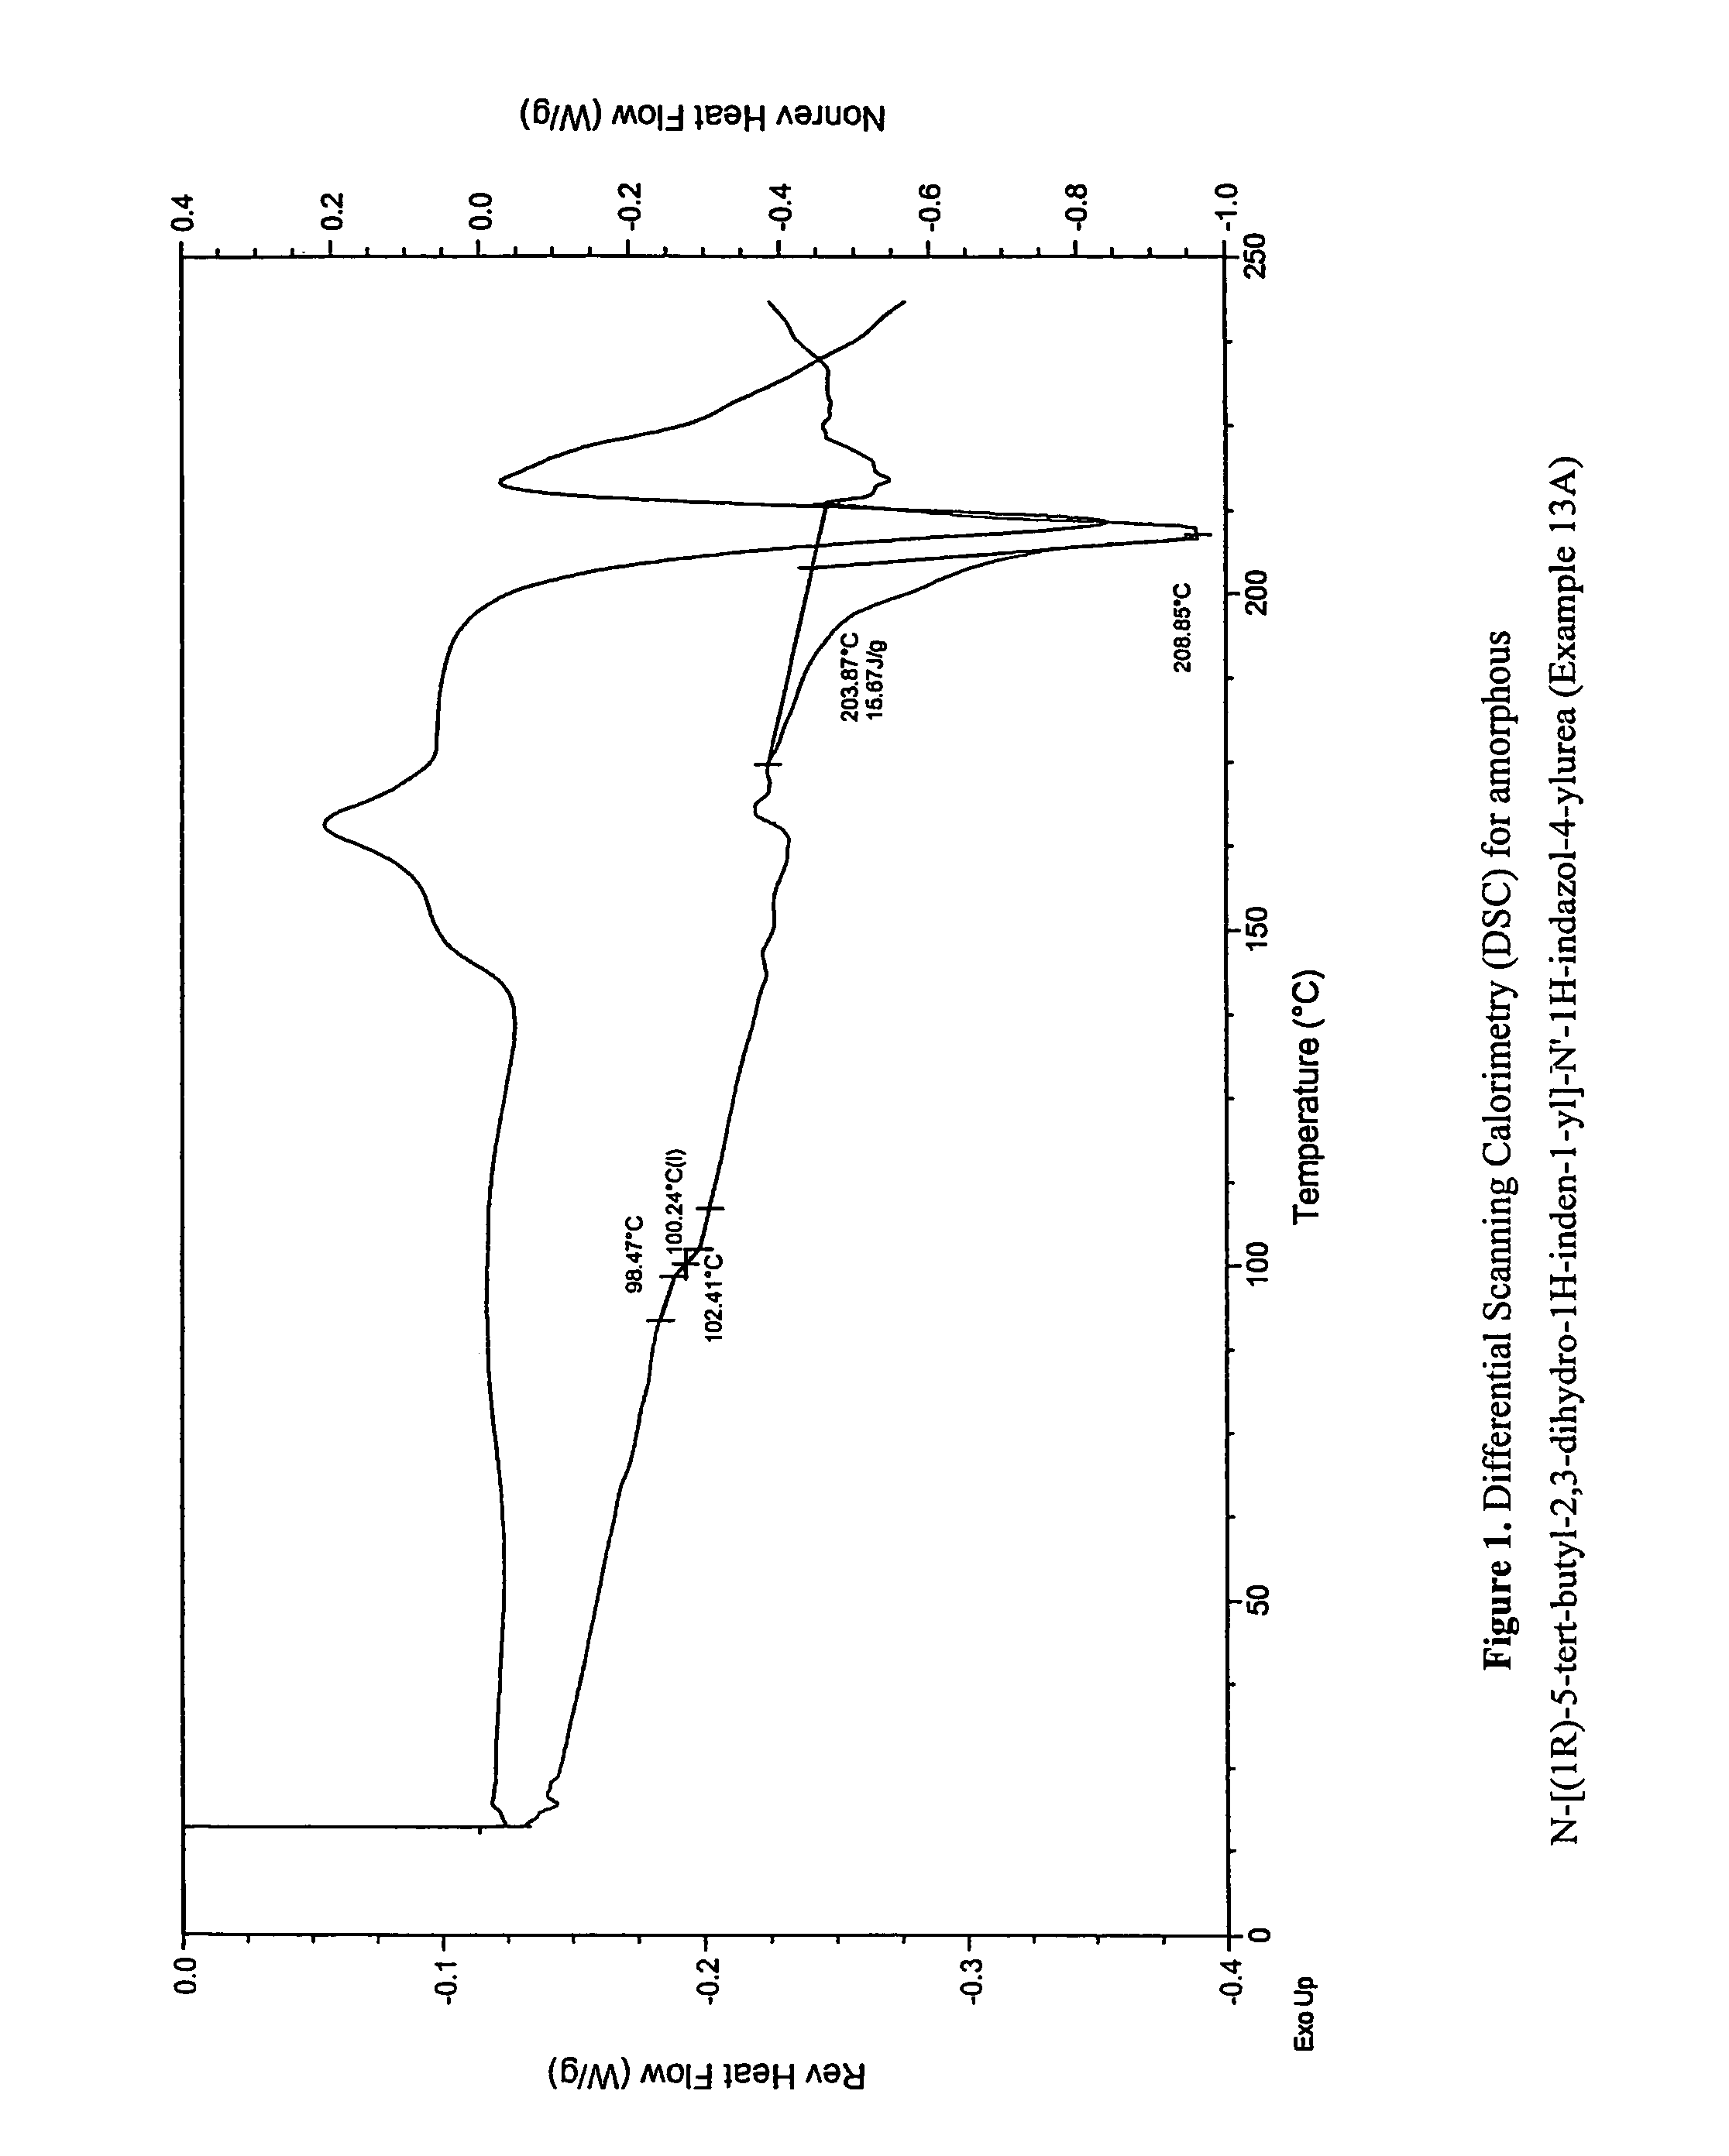 Fused compounds that inhibit vanilloid receptor subtype 1 (VR1) receptor